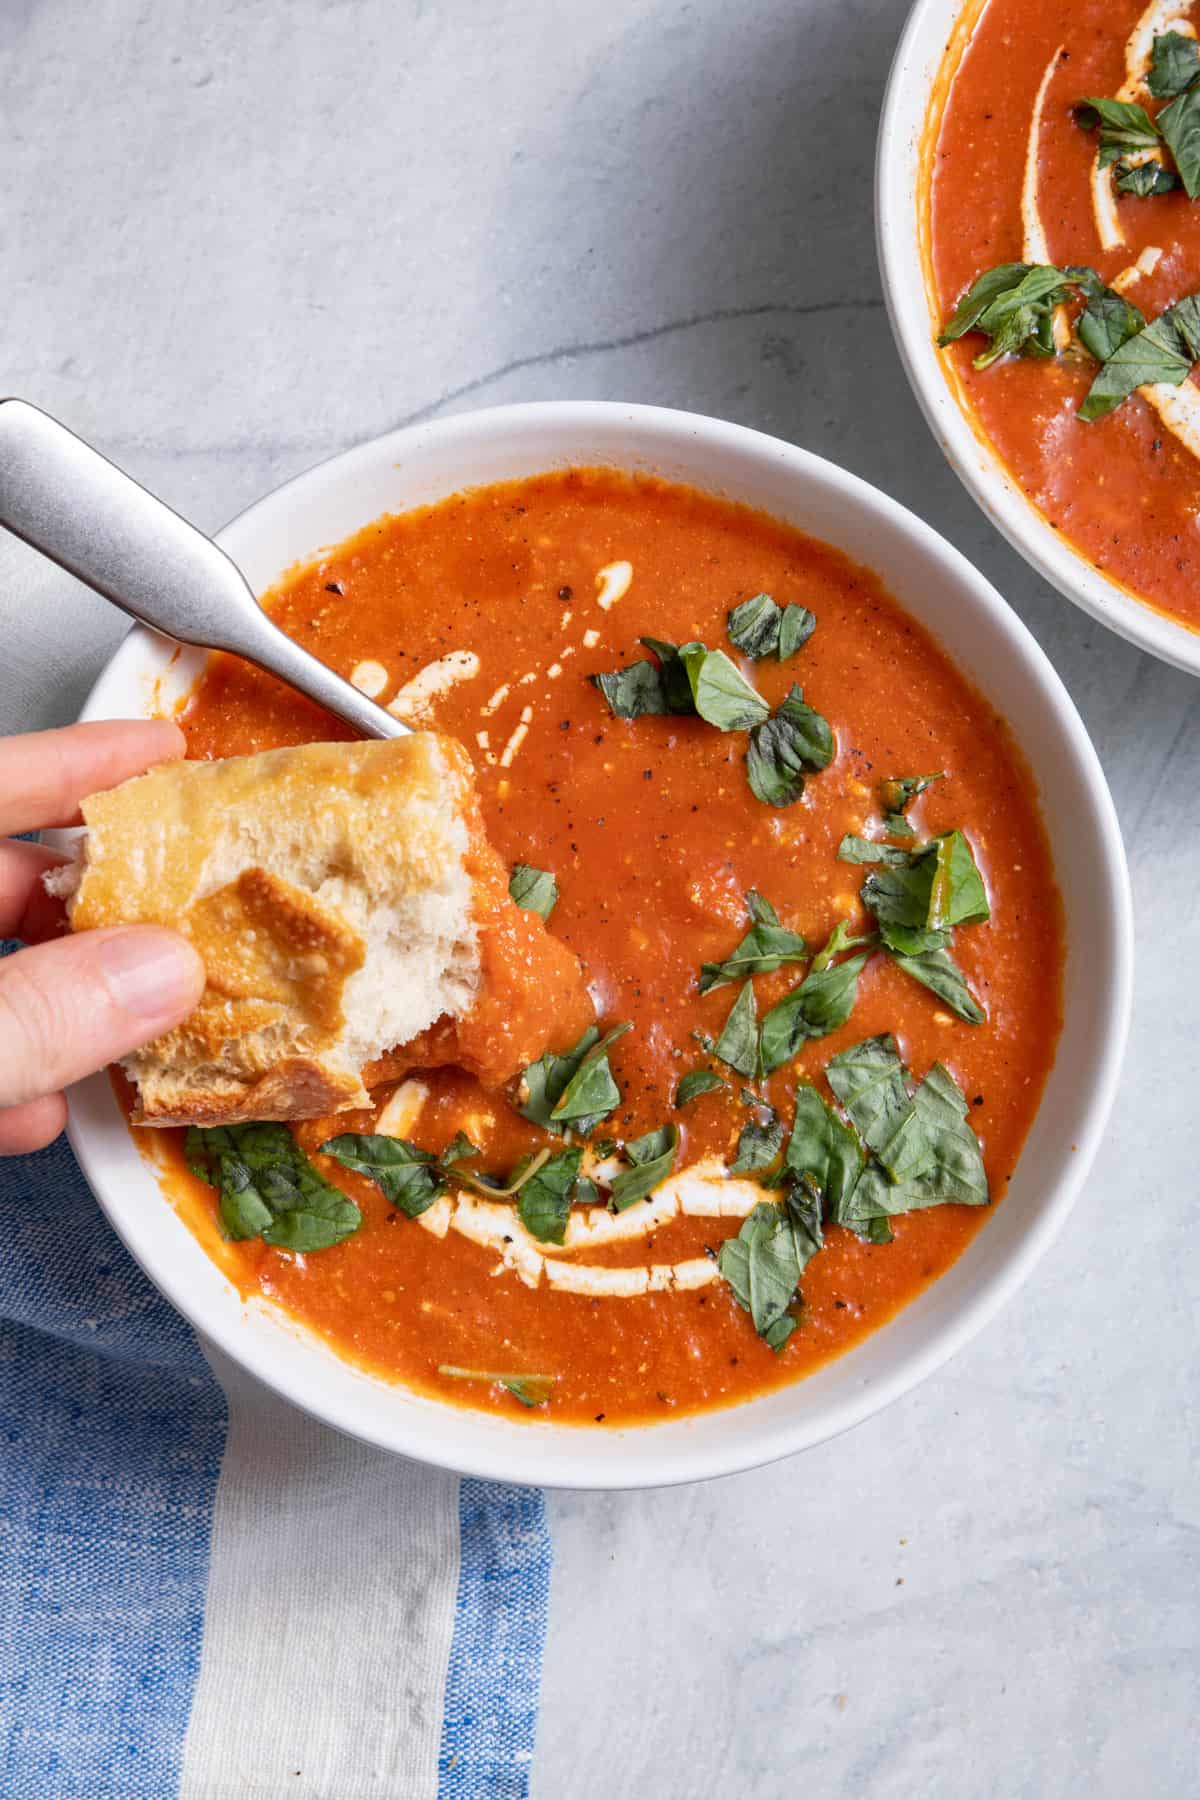 Bread dipping into bowl of roasted red pepper soup